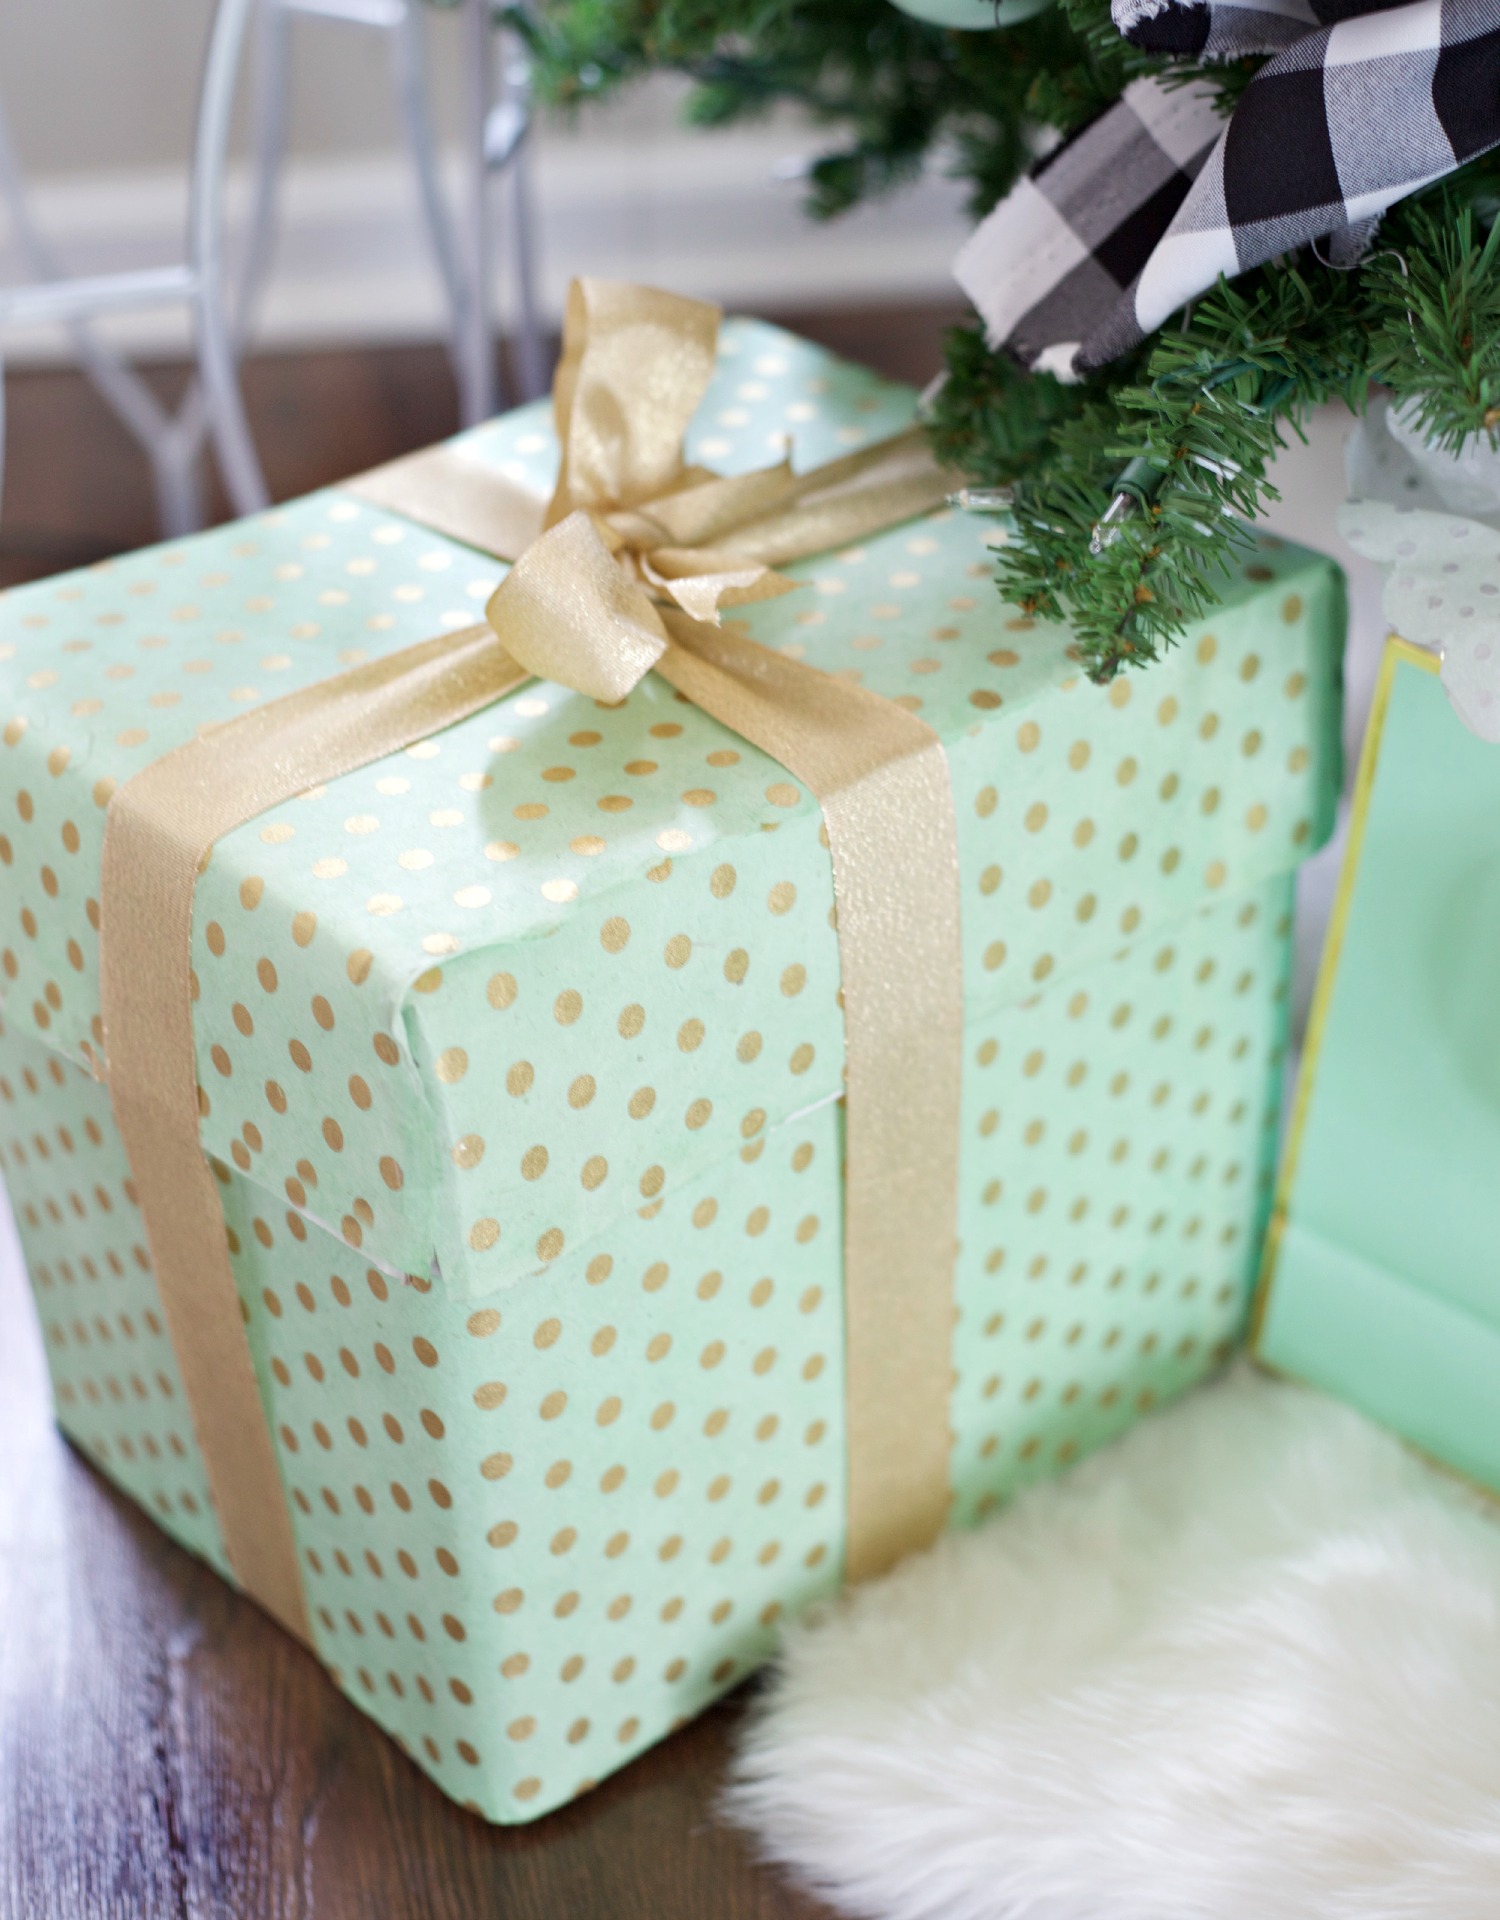 Easy Christmas Decorating Ideas | PartiesforPennies.com | Budget Friendly | Mint & Gold Wrapping Paper| Present